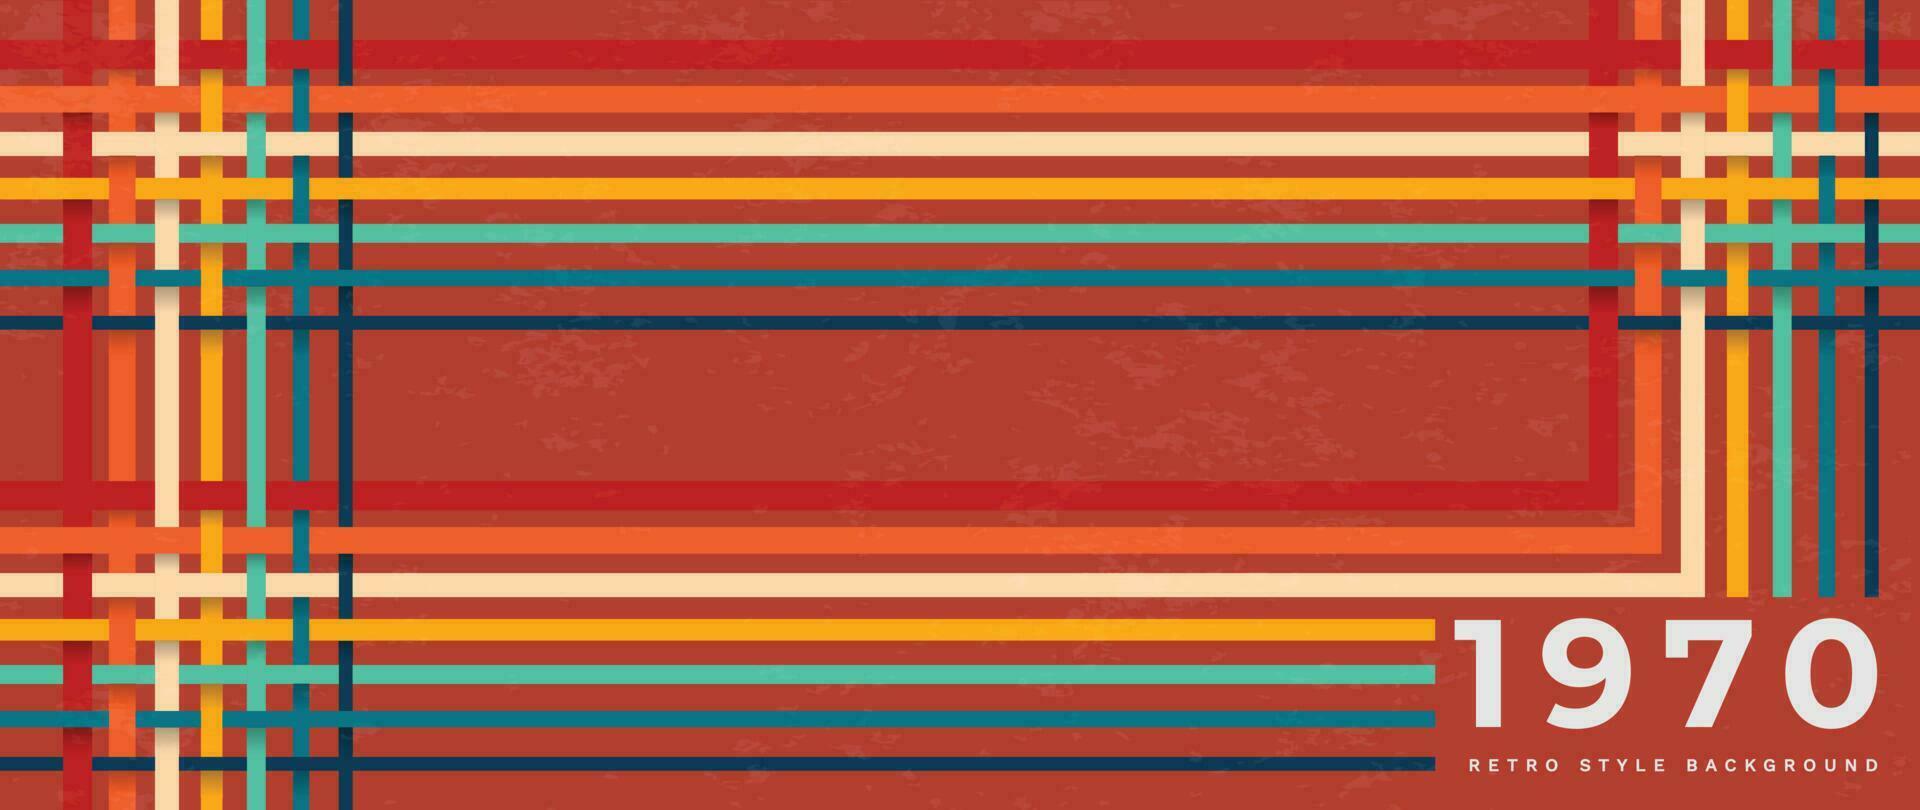 Abstract retro 70s background vector. Colorful vintage 1970 grunge stylish wallpaper with lines, stripes shapes. Illustration design suitable for poster, banner, decorative, wall art. vector